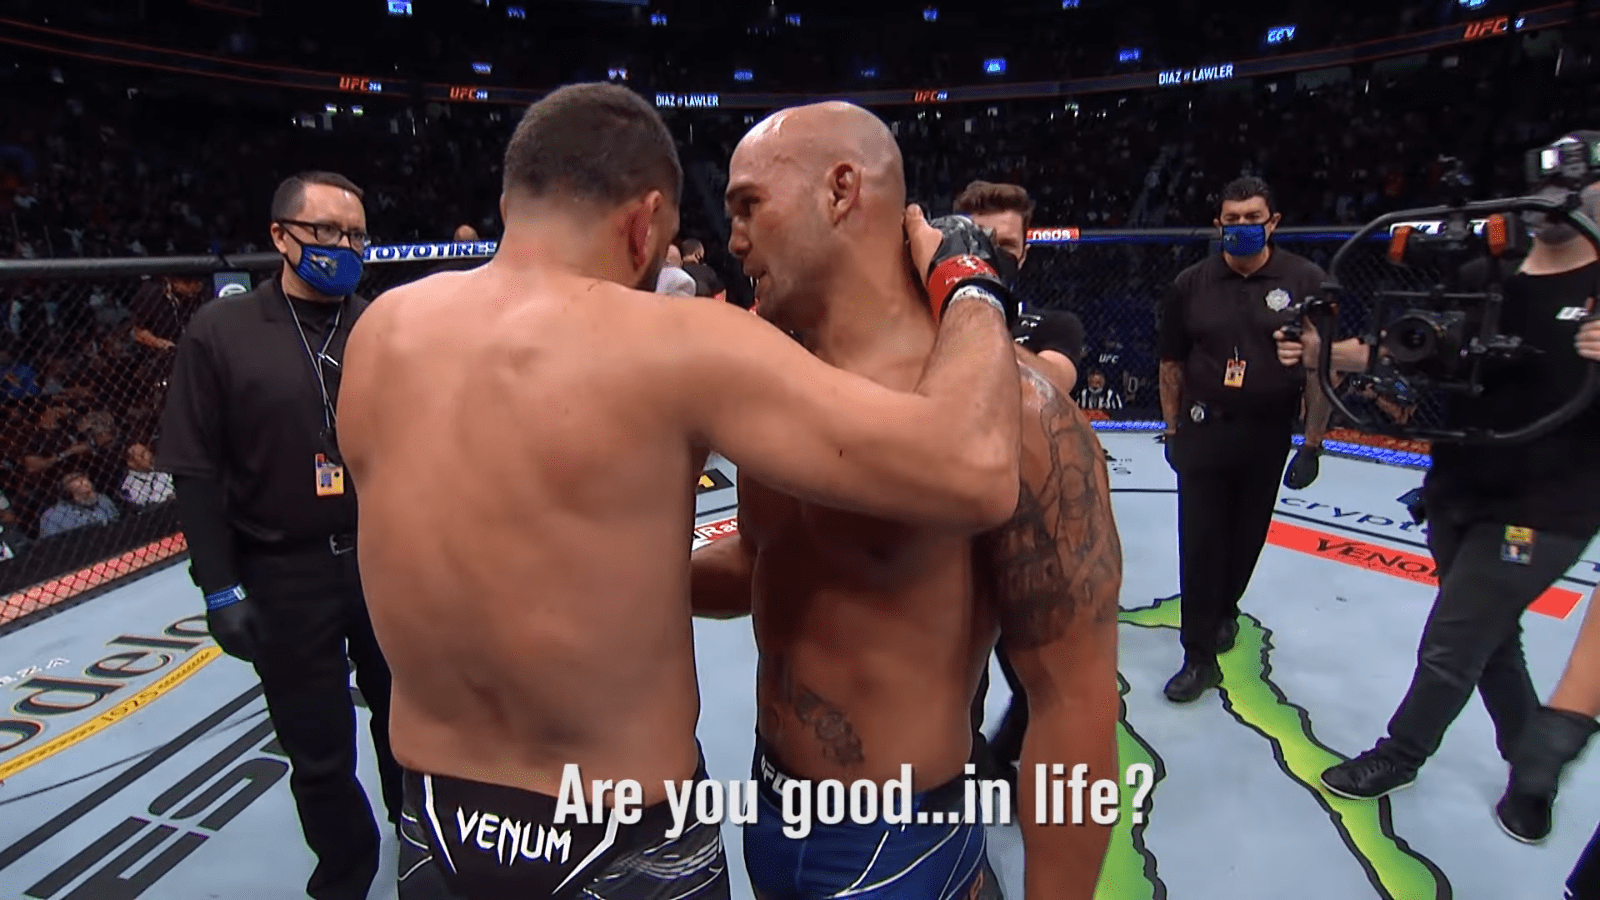 Video: Robbie Lawler asks Nick Diaz to “let me know if I can help” in life thumbnail